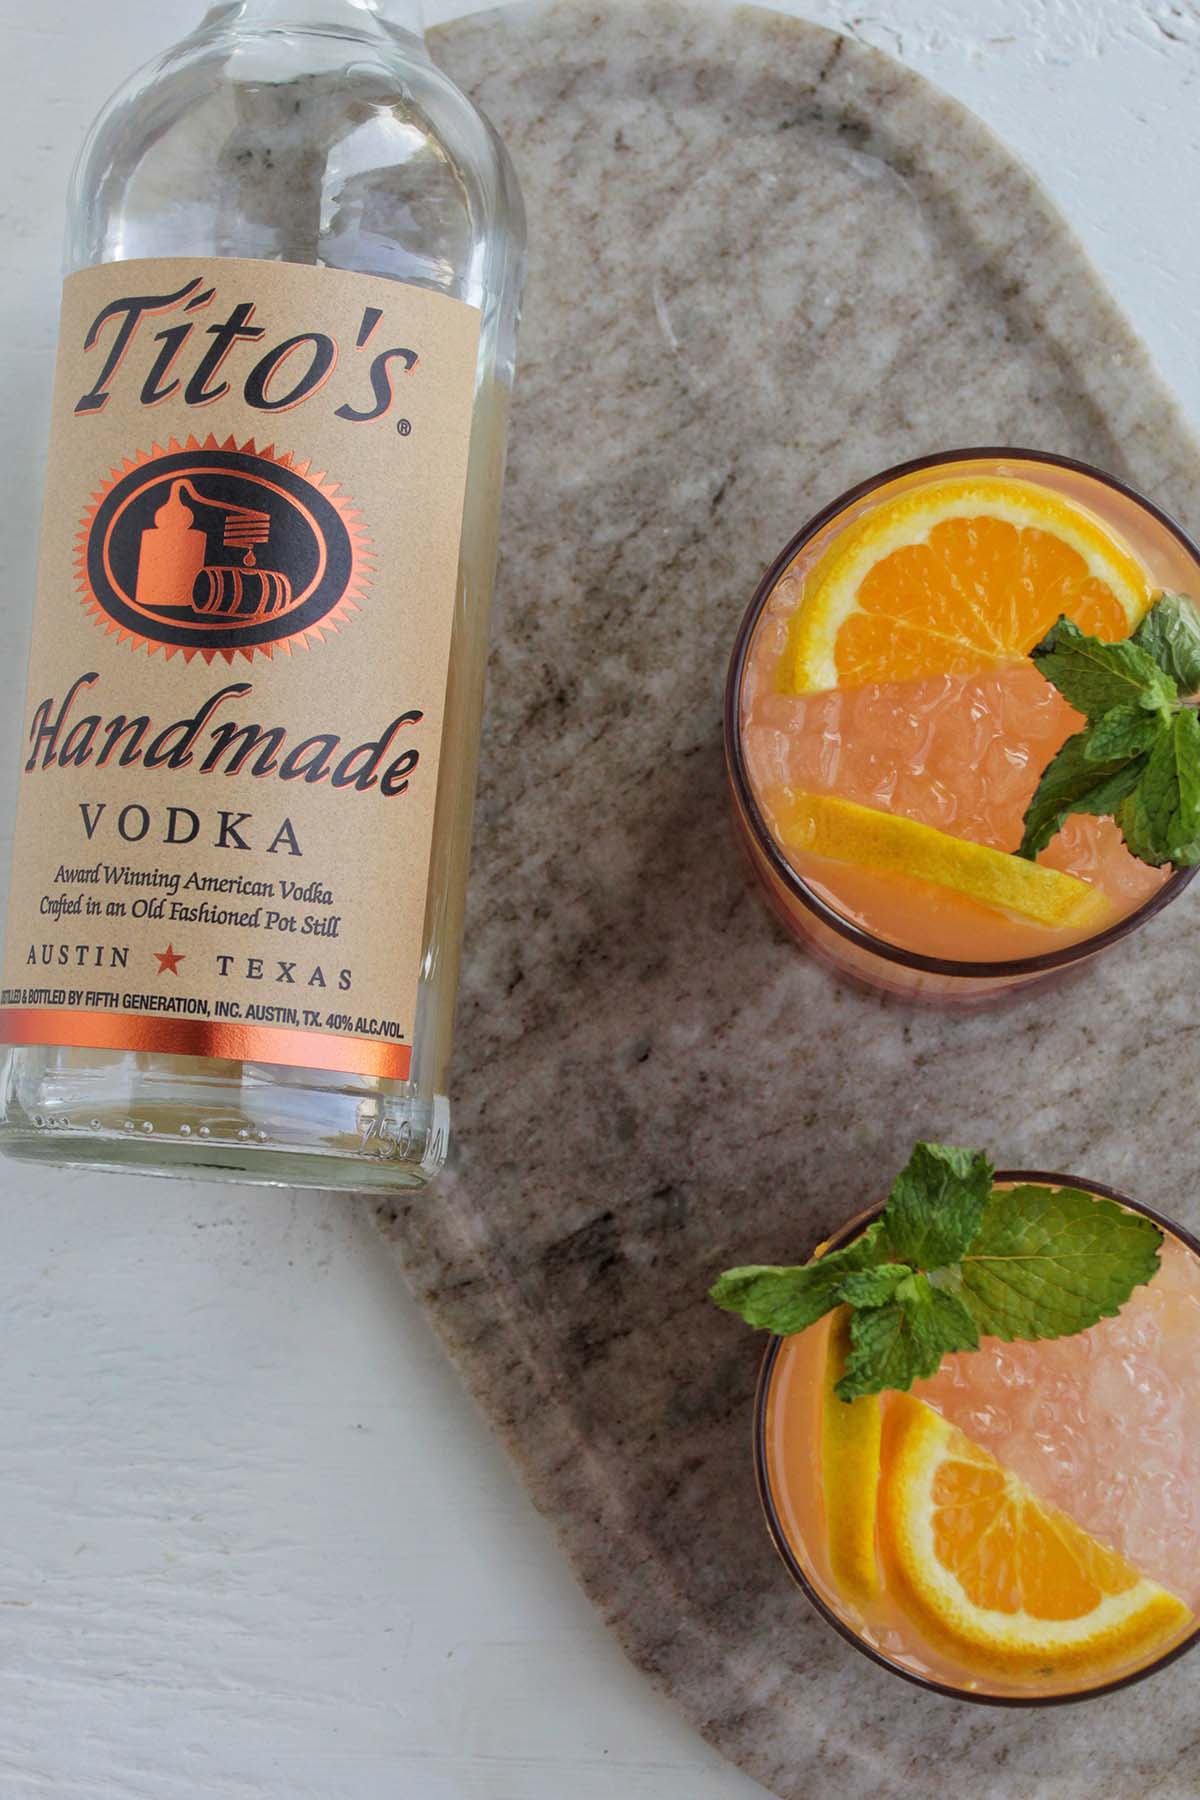 Tito's vodka bottle laying next to two orange cocktails.